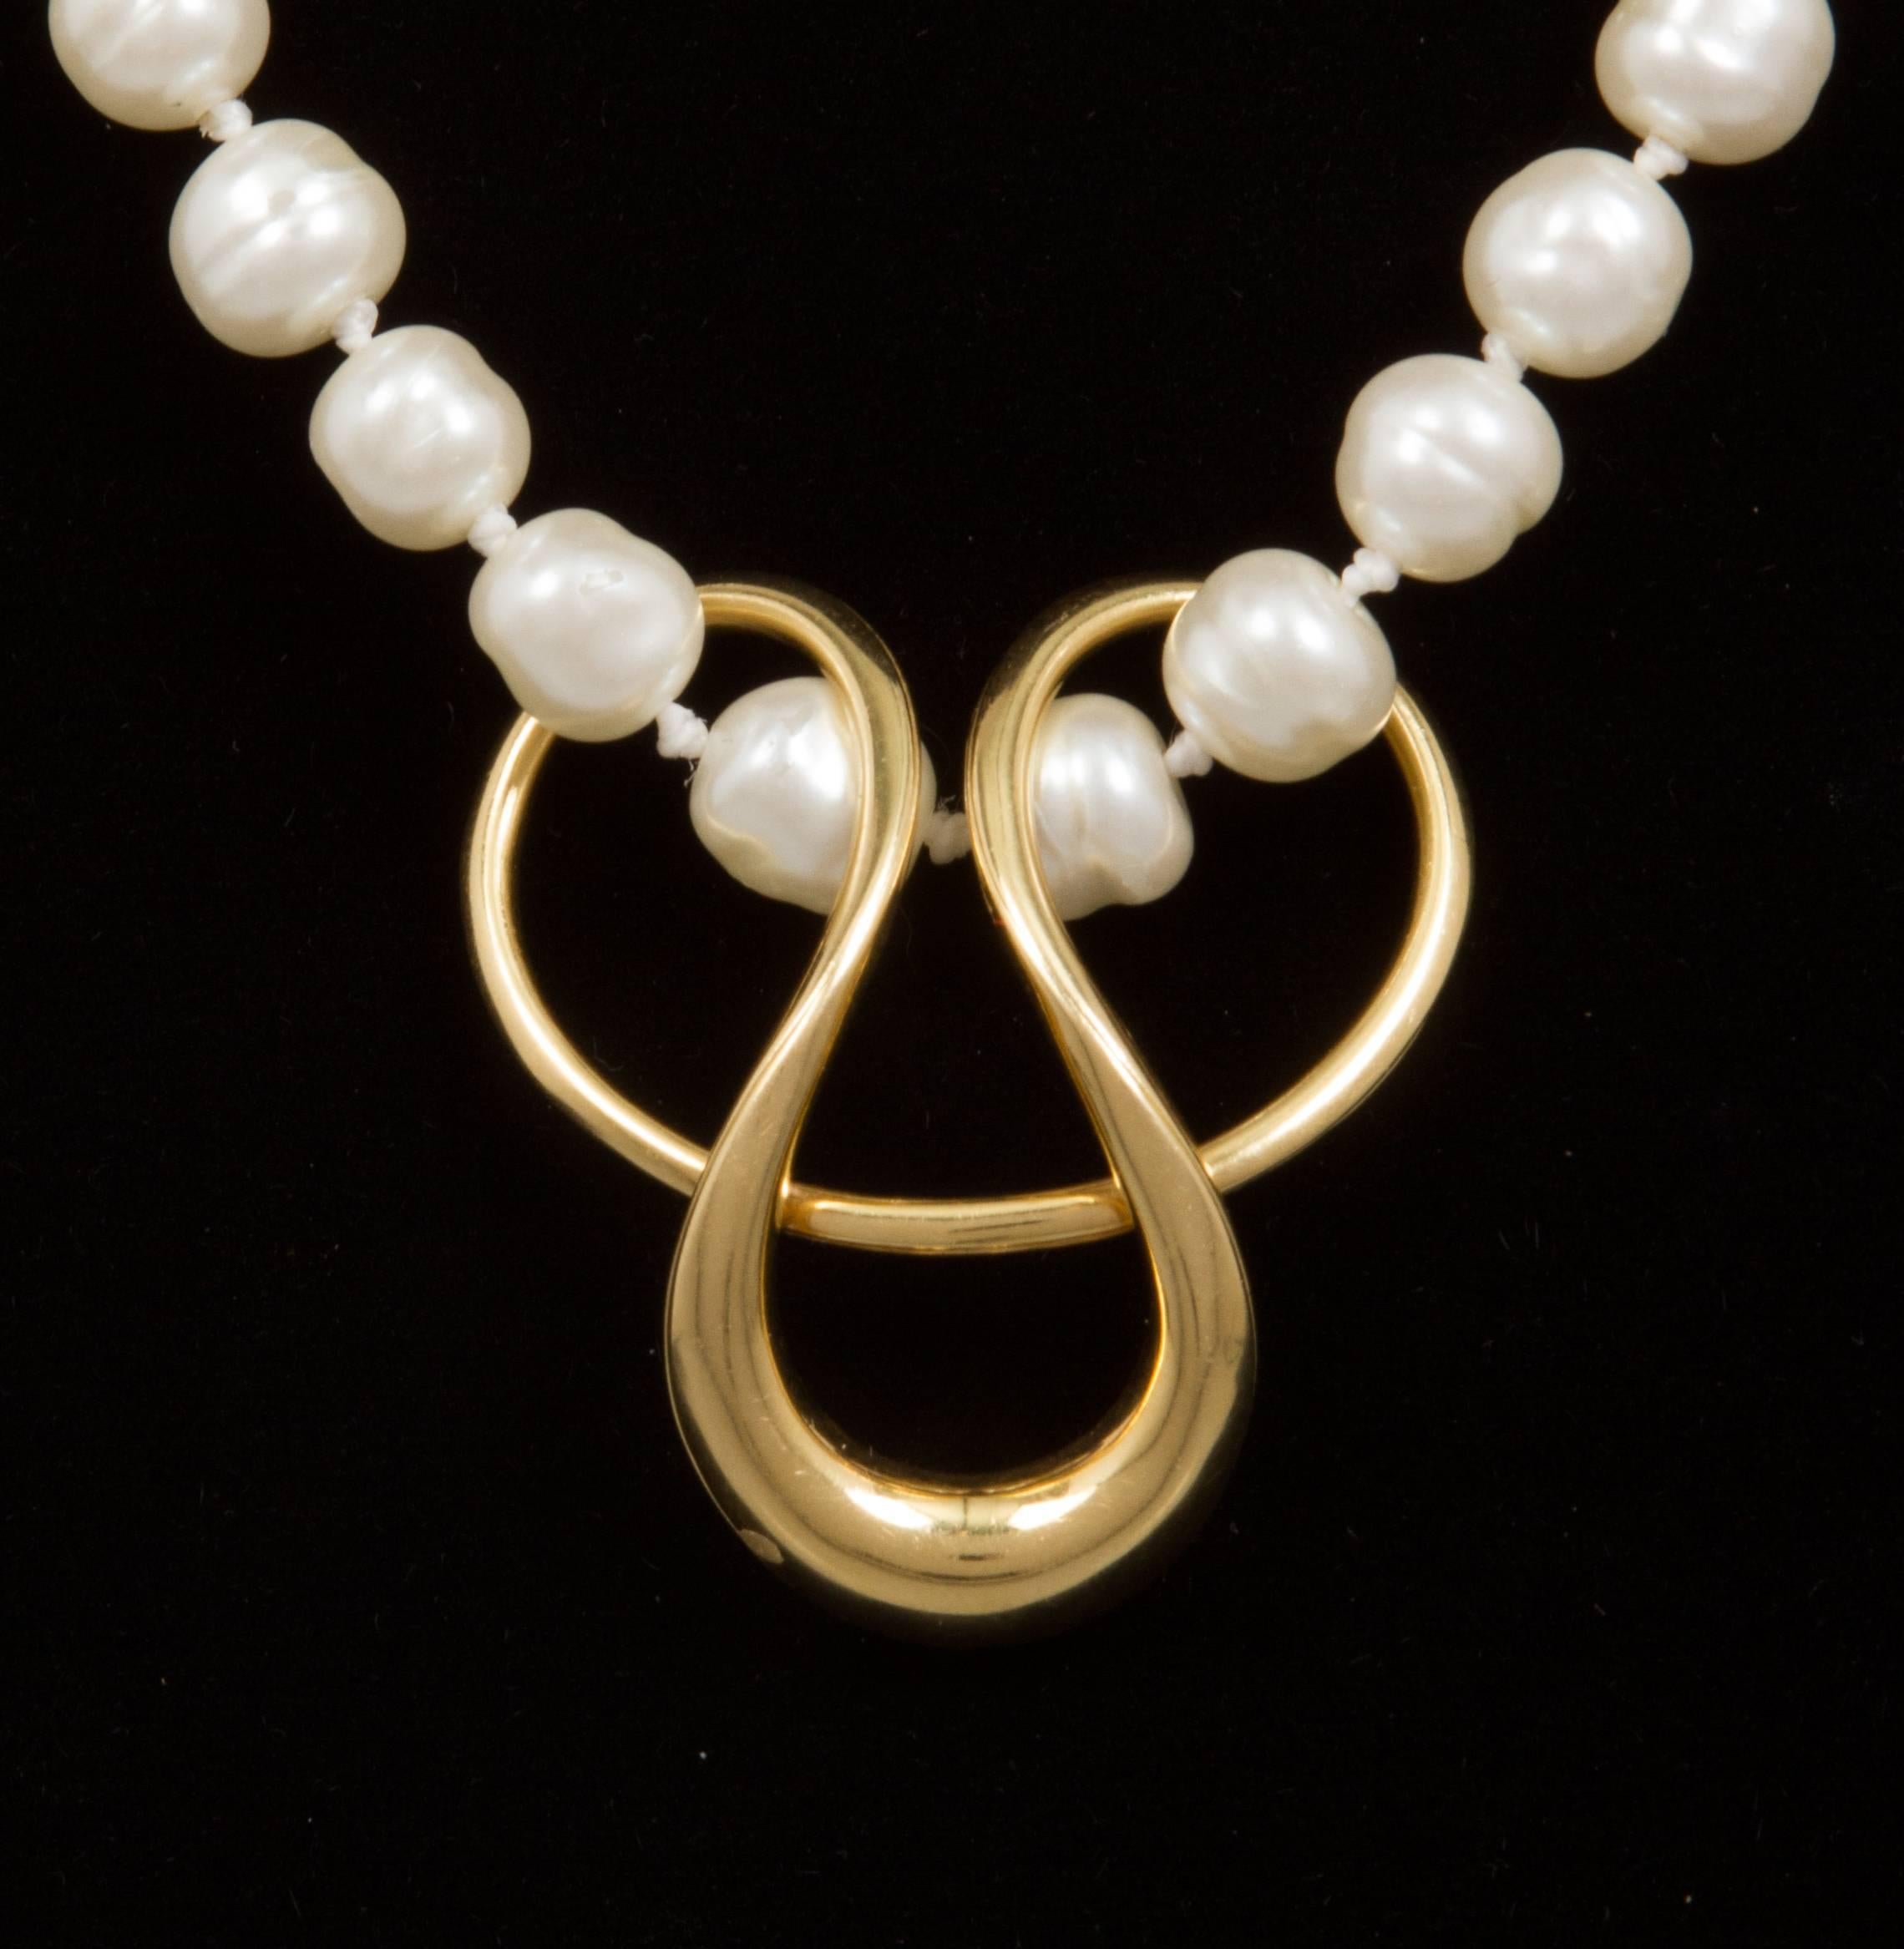 This  modern sculptural pendant would work on a gold chain, pearls or velvet cord.